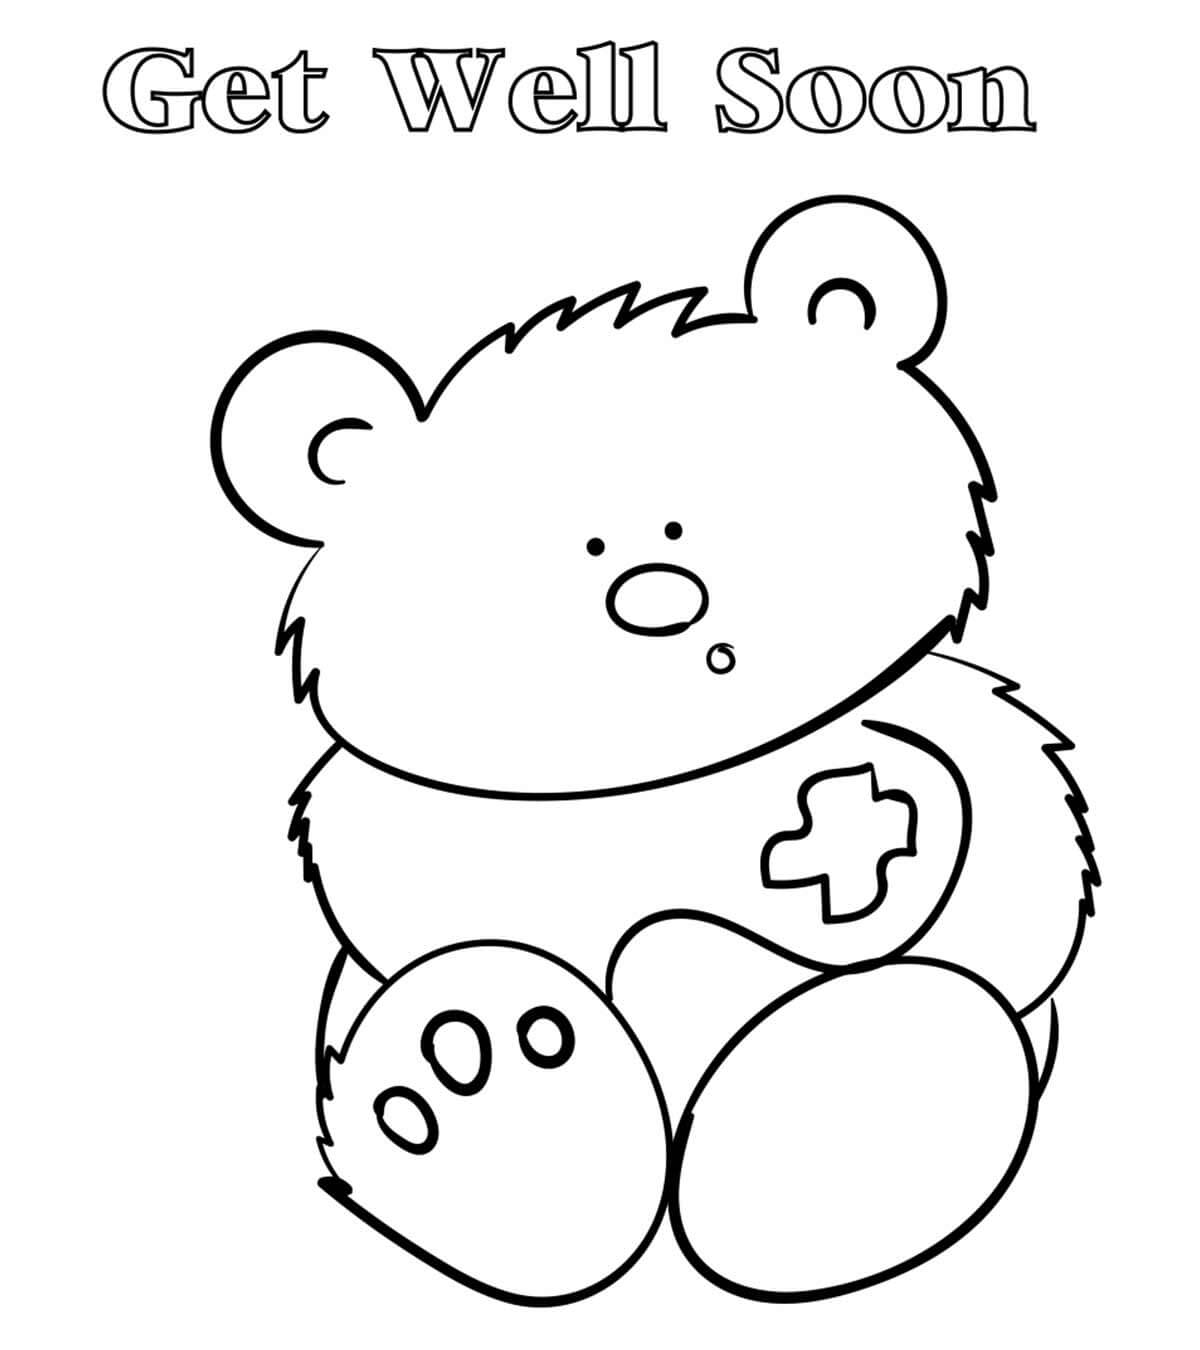 Top 25 Free Printable Get Well Soon Coloring Pages Online Intended For Get Well Soon Card Template